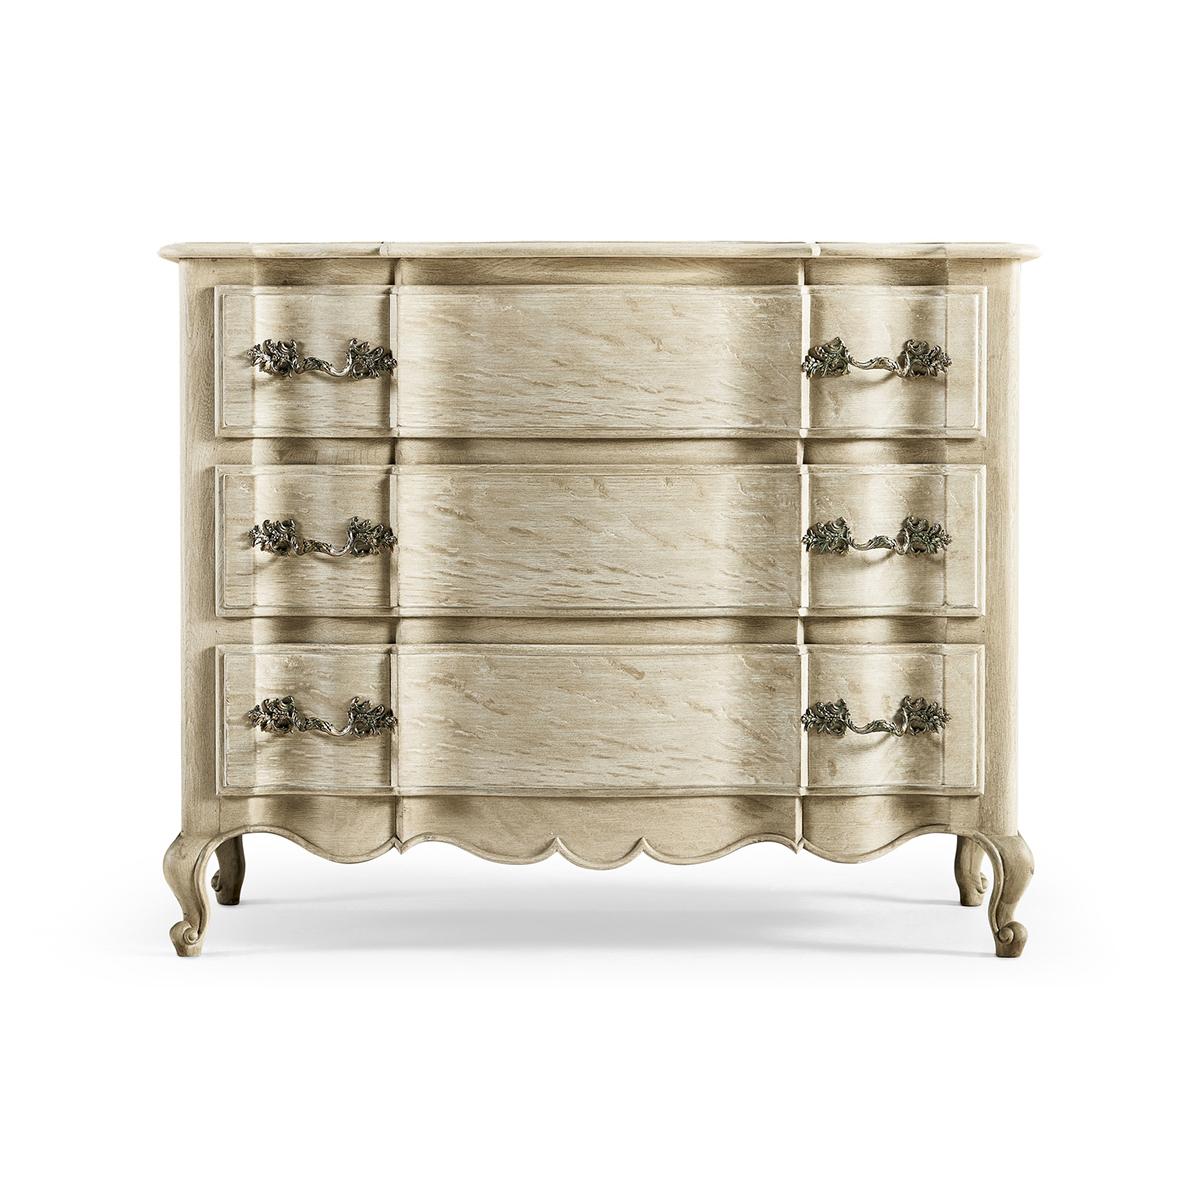 French Provincial Oak Commode, a solid stripped oak case featuring three serpentine front drawers and a hand-carved skirt on delicate cabriole legs.

Dimensions: 42